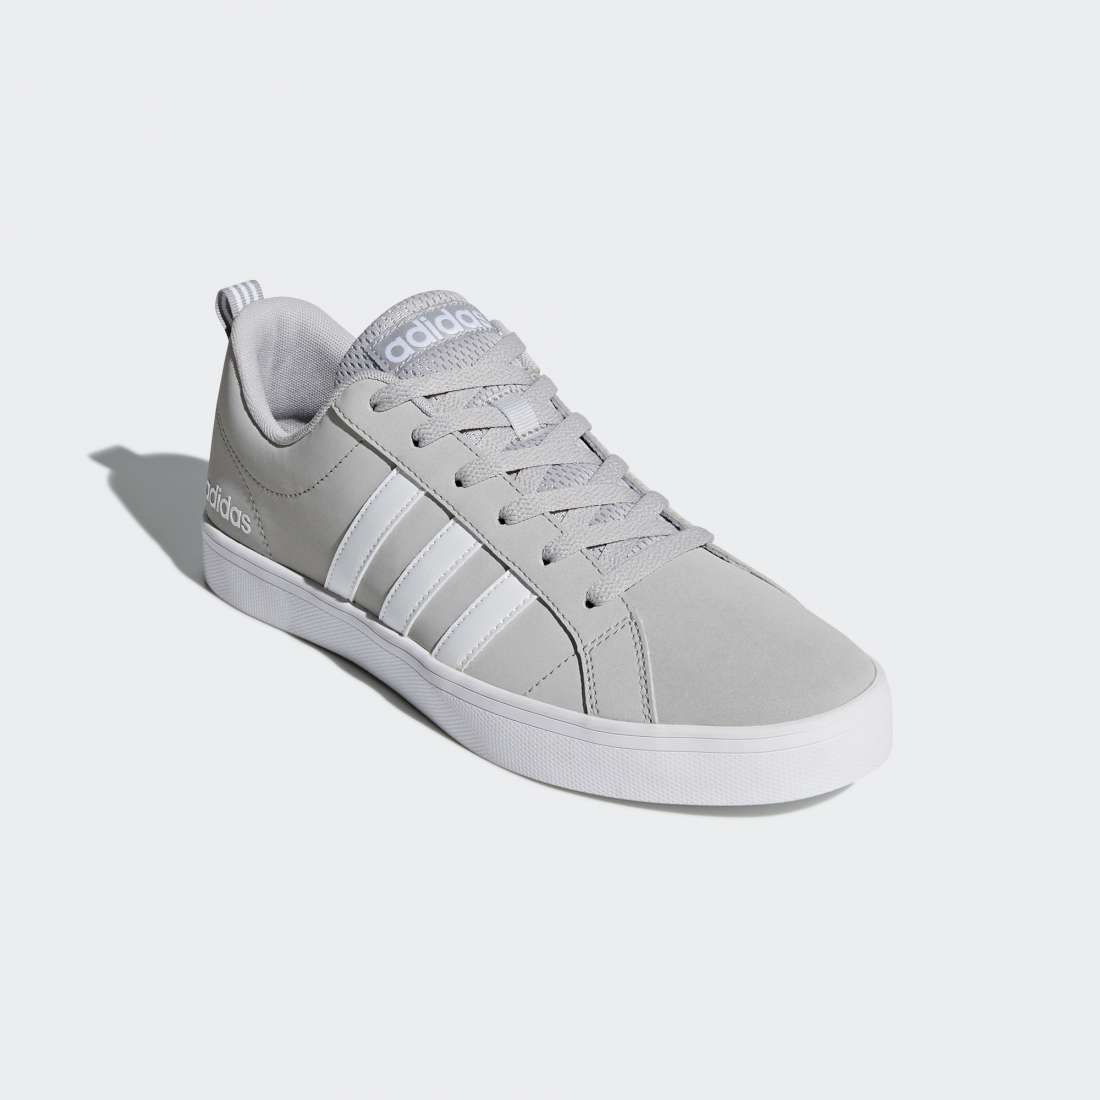 ADIDAS VS PACE GRETWO/FTWWHT/FTWWHT